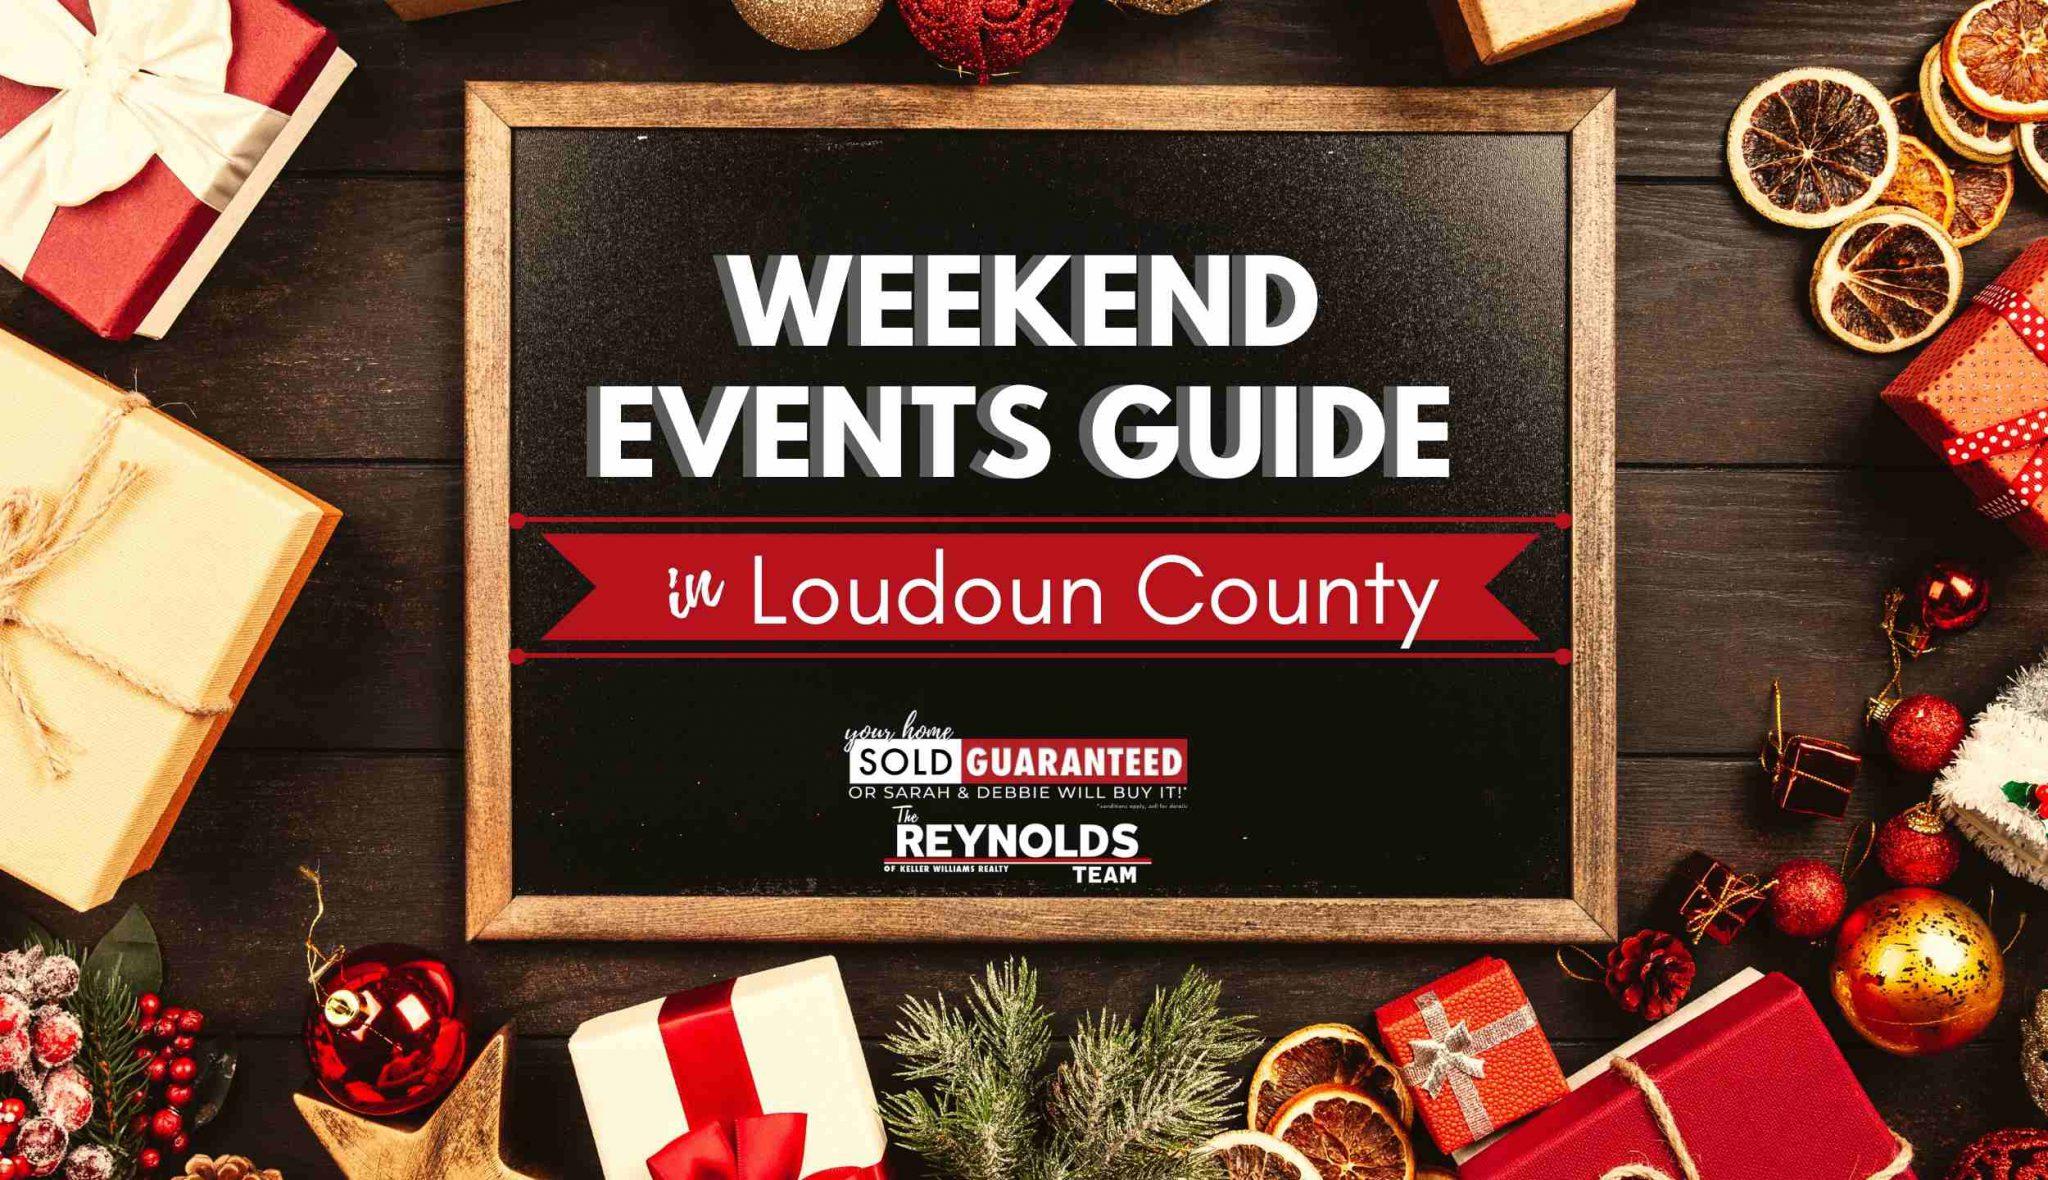 Weekend Events Guide in Loudoun County